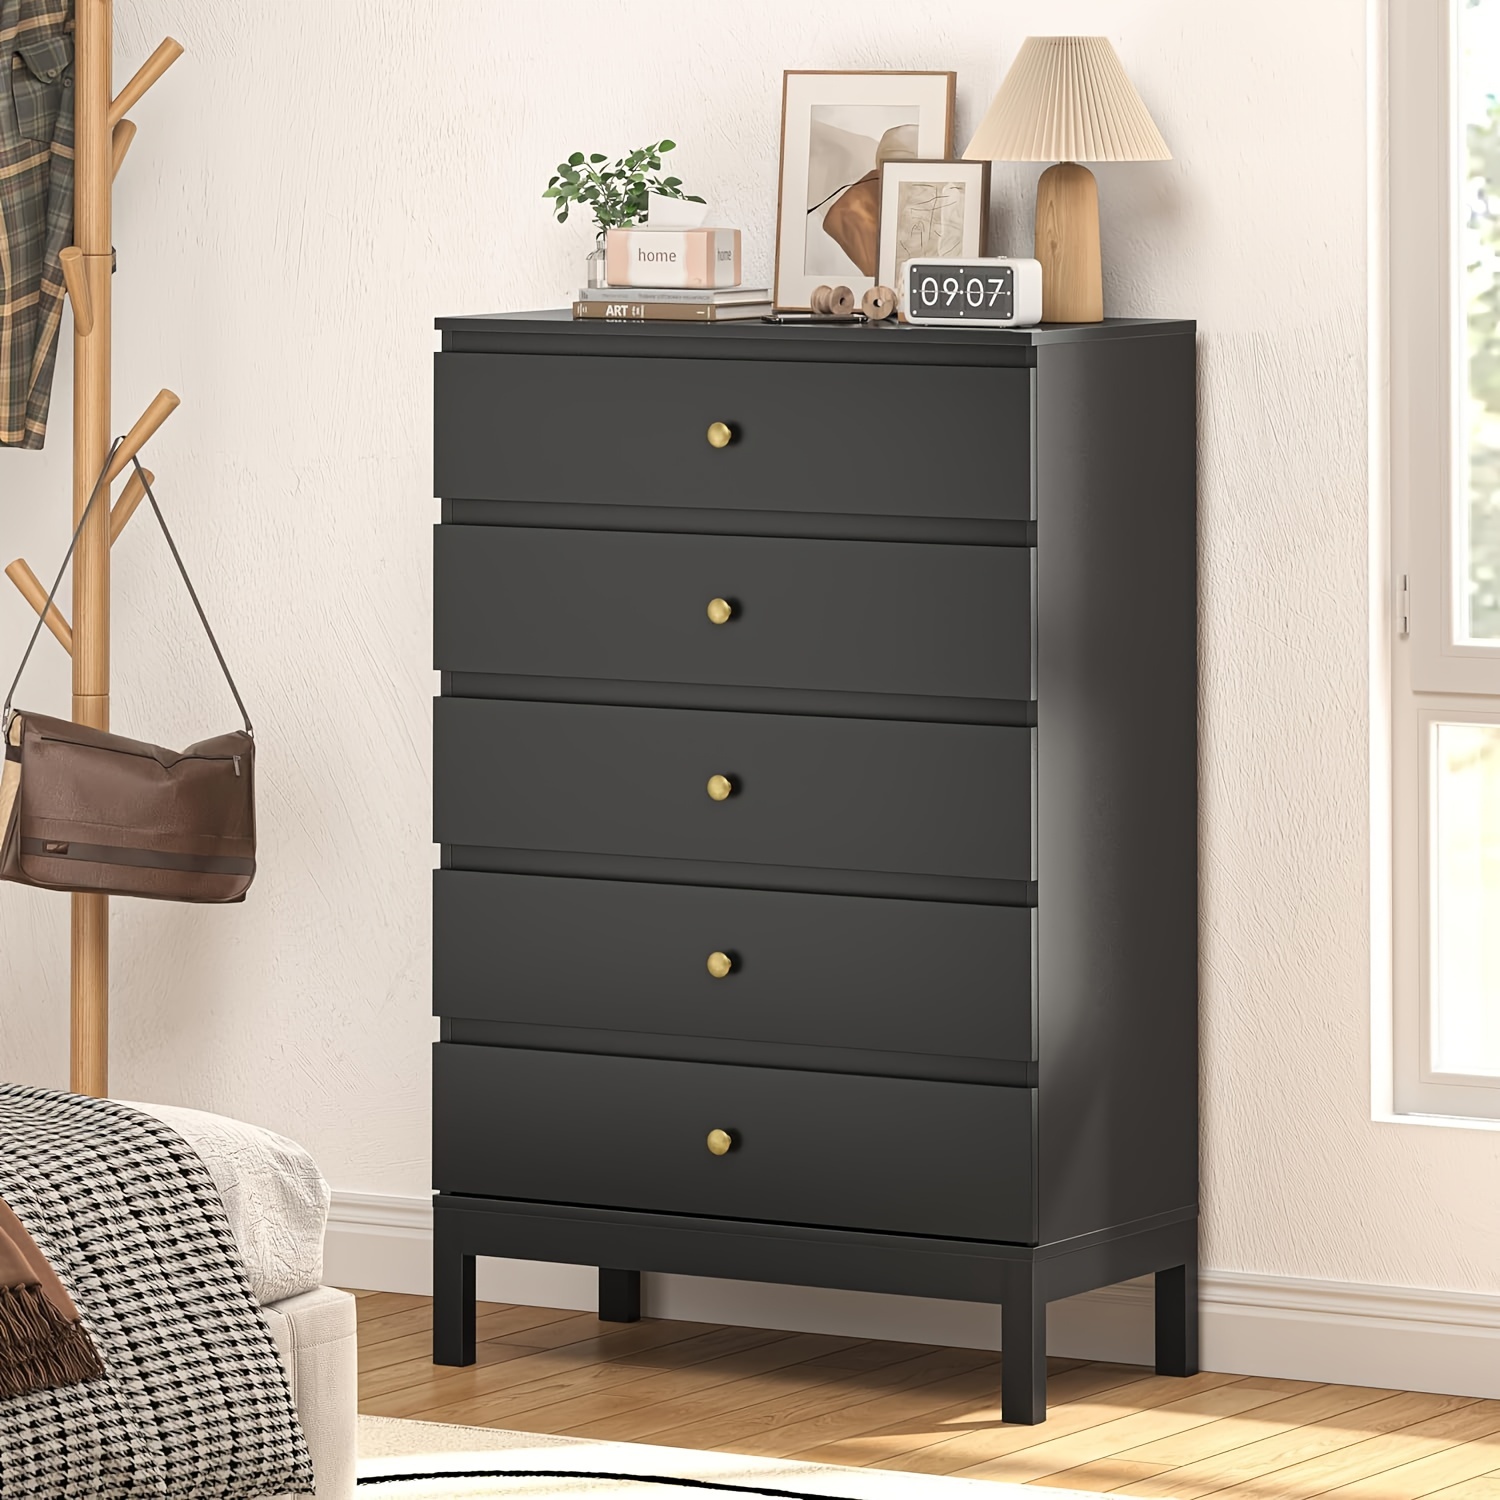 

Black 5 Drawer Dresser Modern Chest Of Drawers With Smooth Metal Rail, Clothing Organizer With Wide Storage Space, Storage Cabinet For Living Room, Bedroom, Closet, Hallway